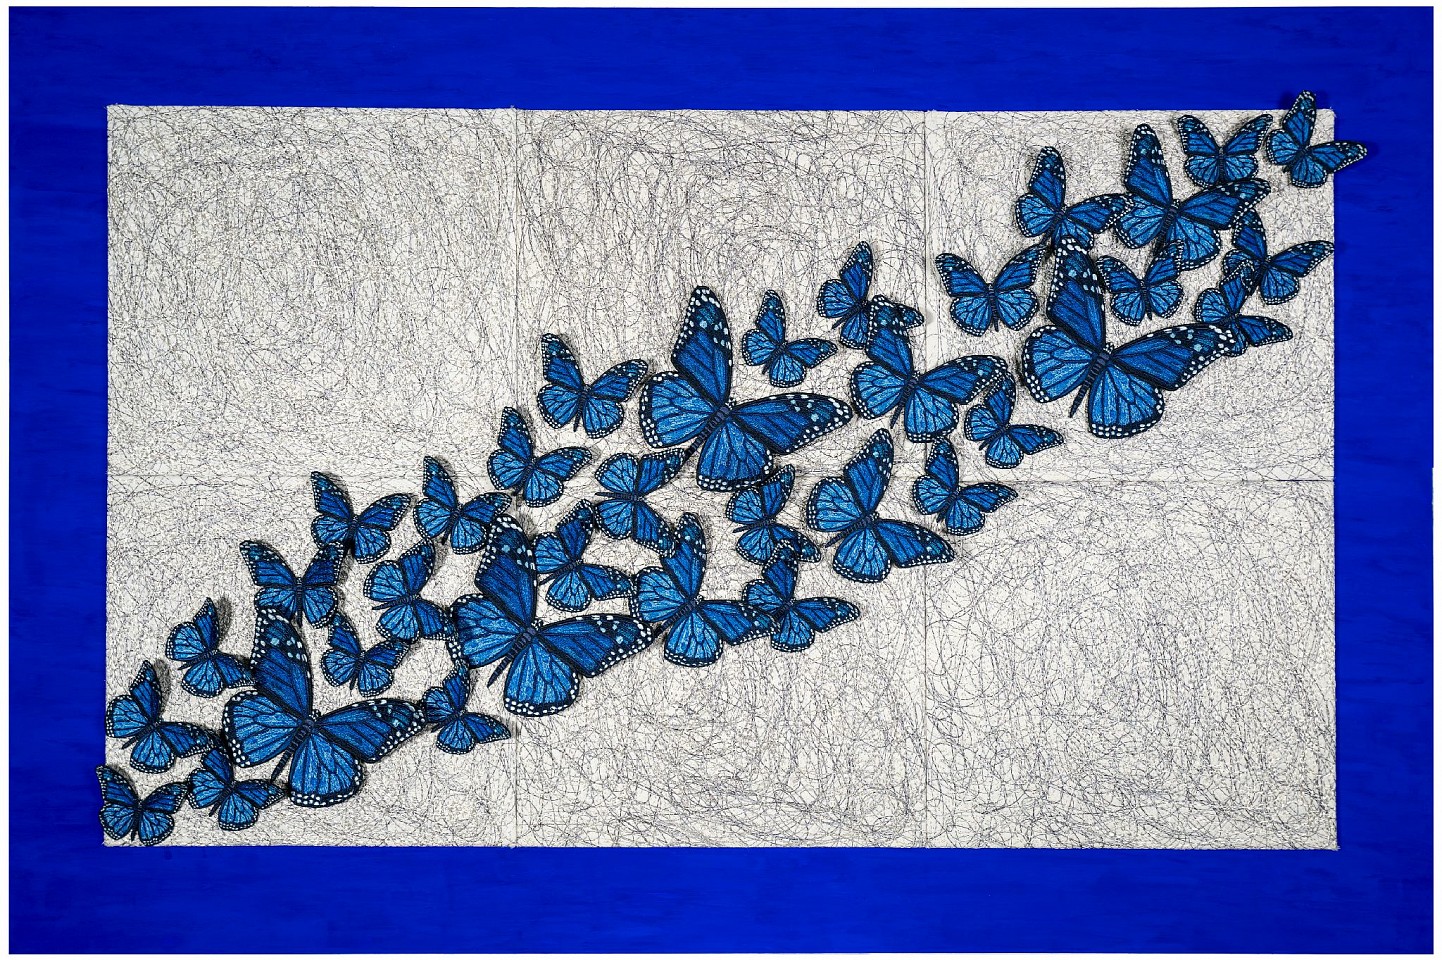 Stephen Wilson, Butterfly Migration
2017, Mixed Media